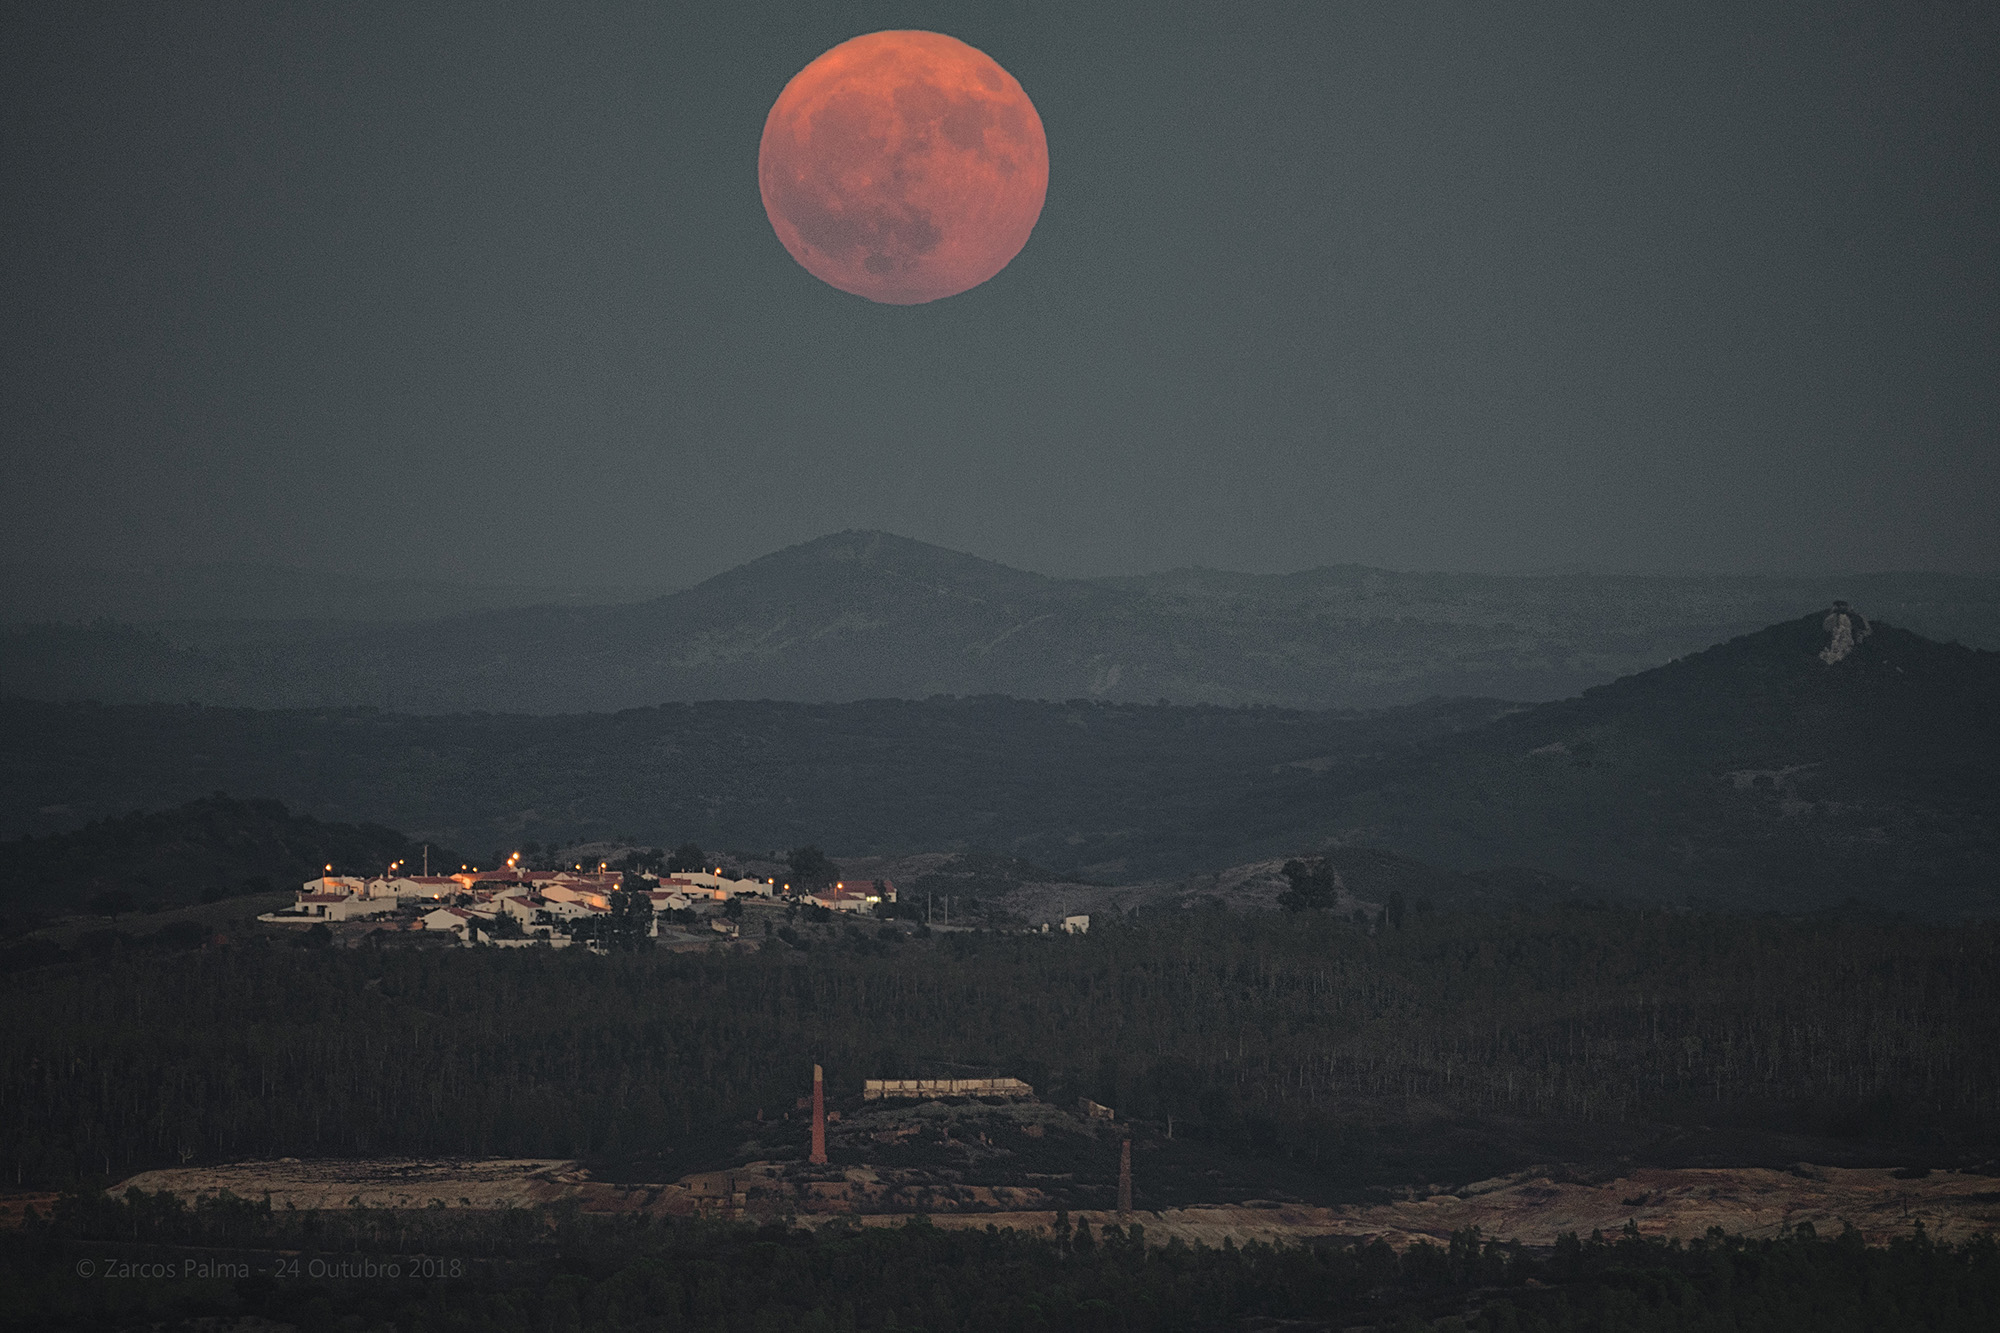 The full moon of October, sometimes referred to as the Hunter's Moon, rises over the small Portuguese village of Montes Altos in this photo by José Zarcos Palma.  He captured this photo from a hilltop in the nearby town of Moreanes on Oct.  24, 2018.